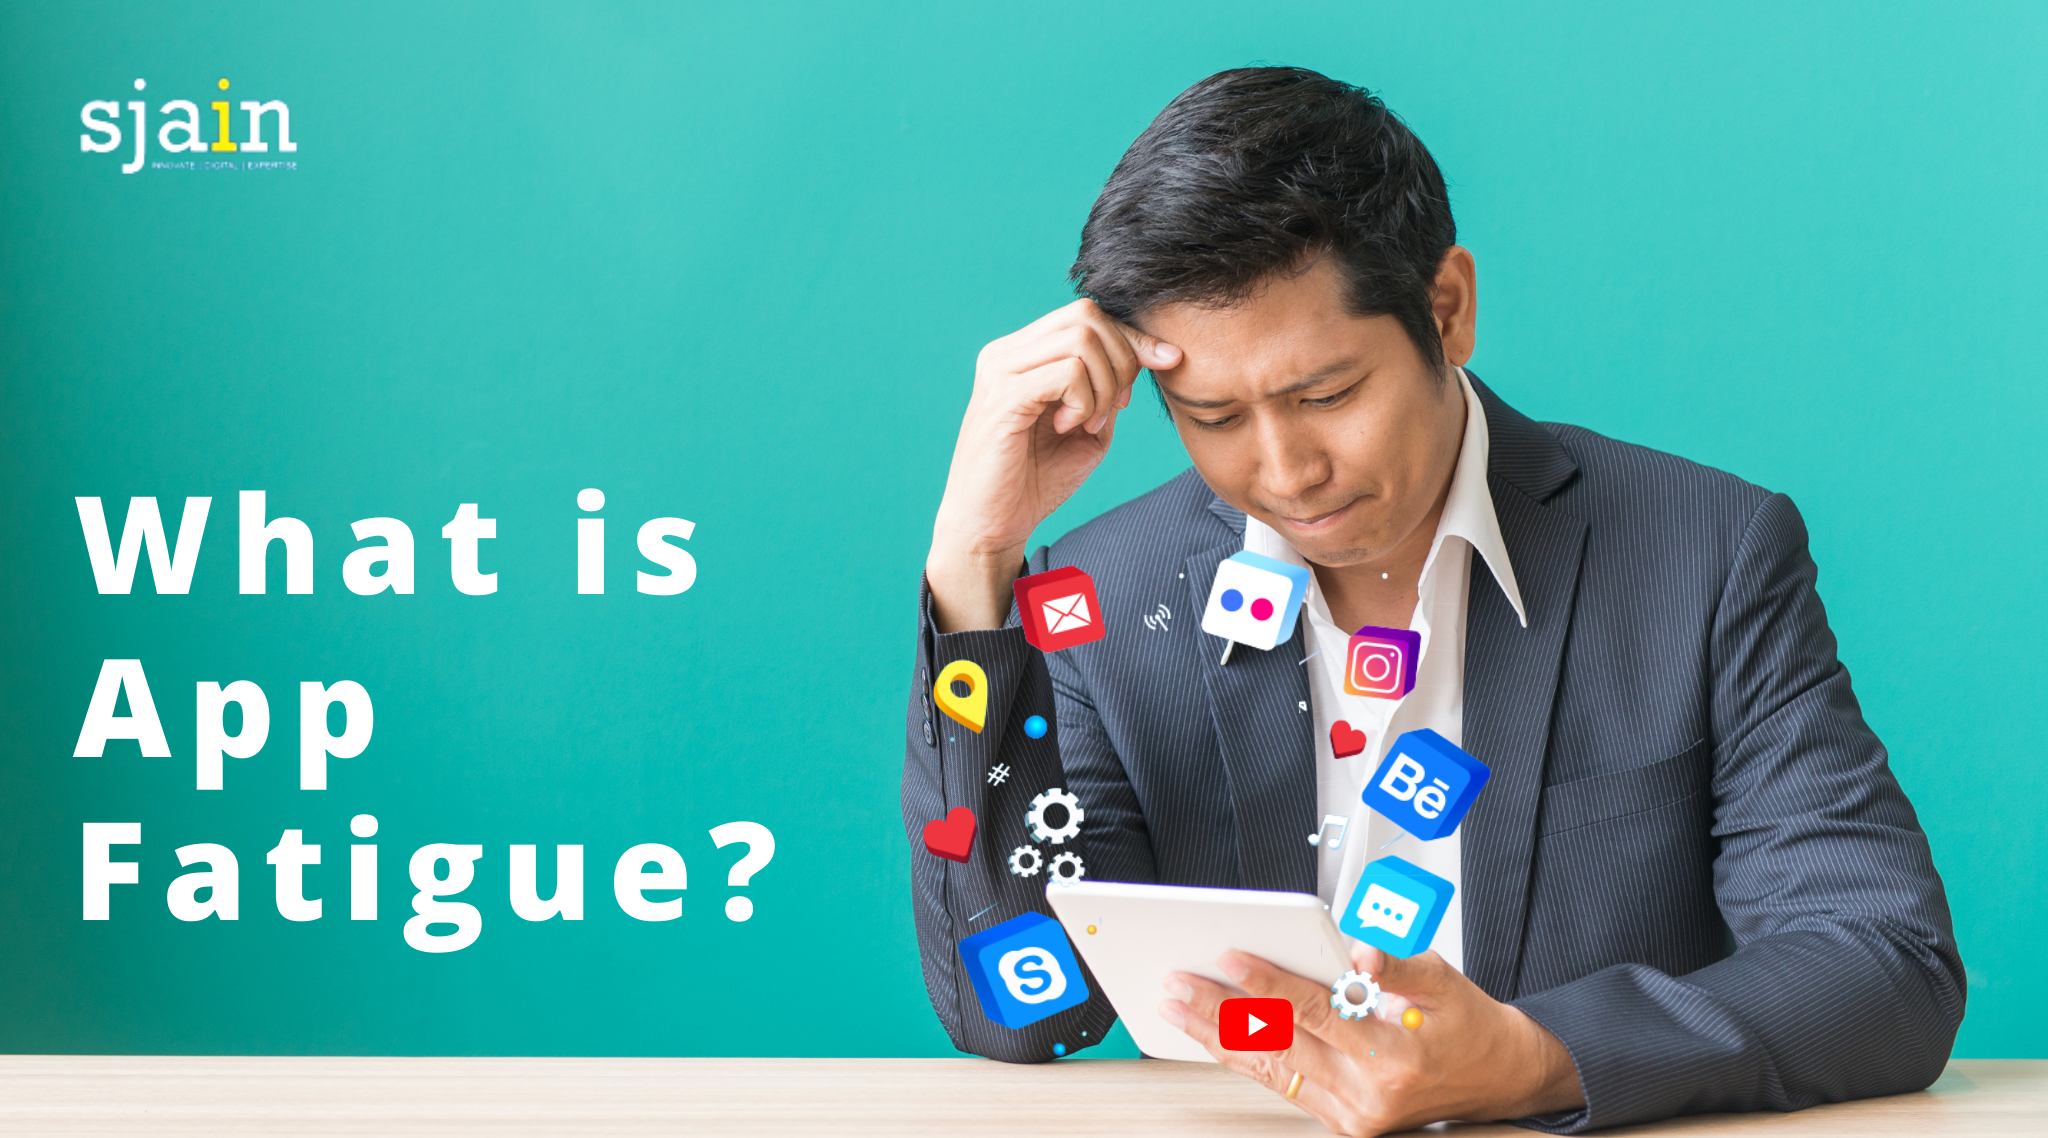 Is App fatigue a thing?